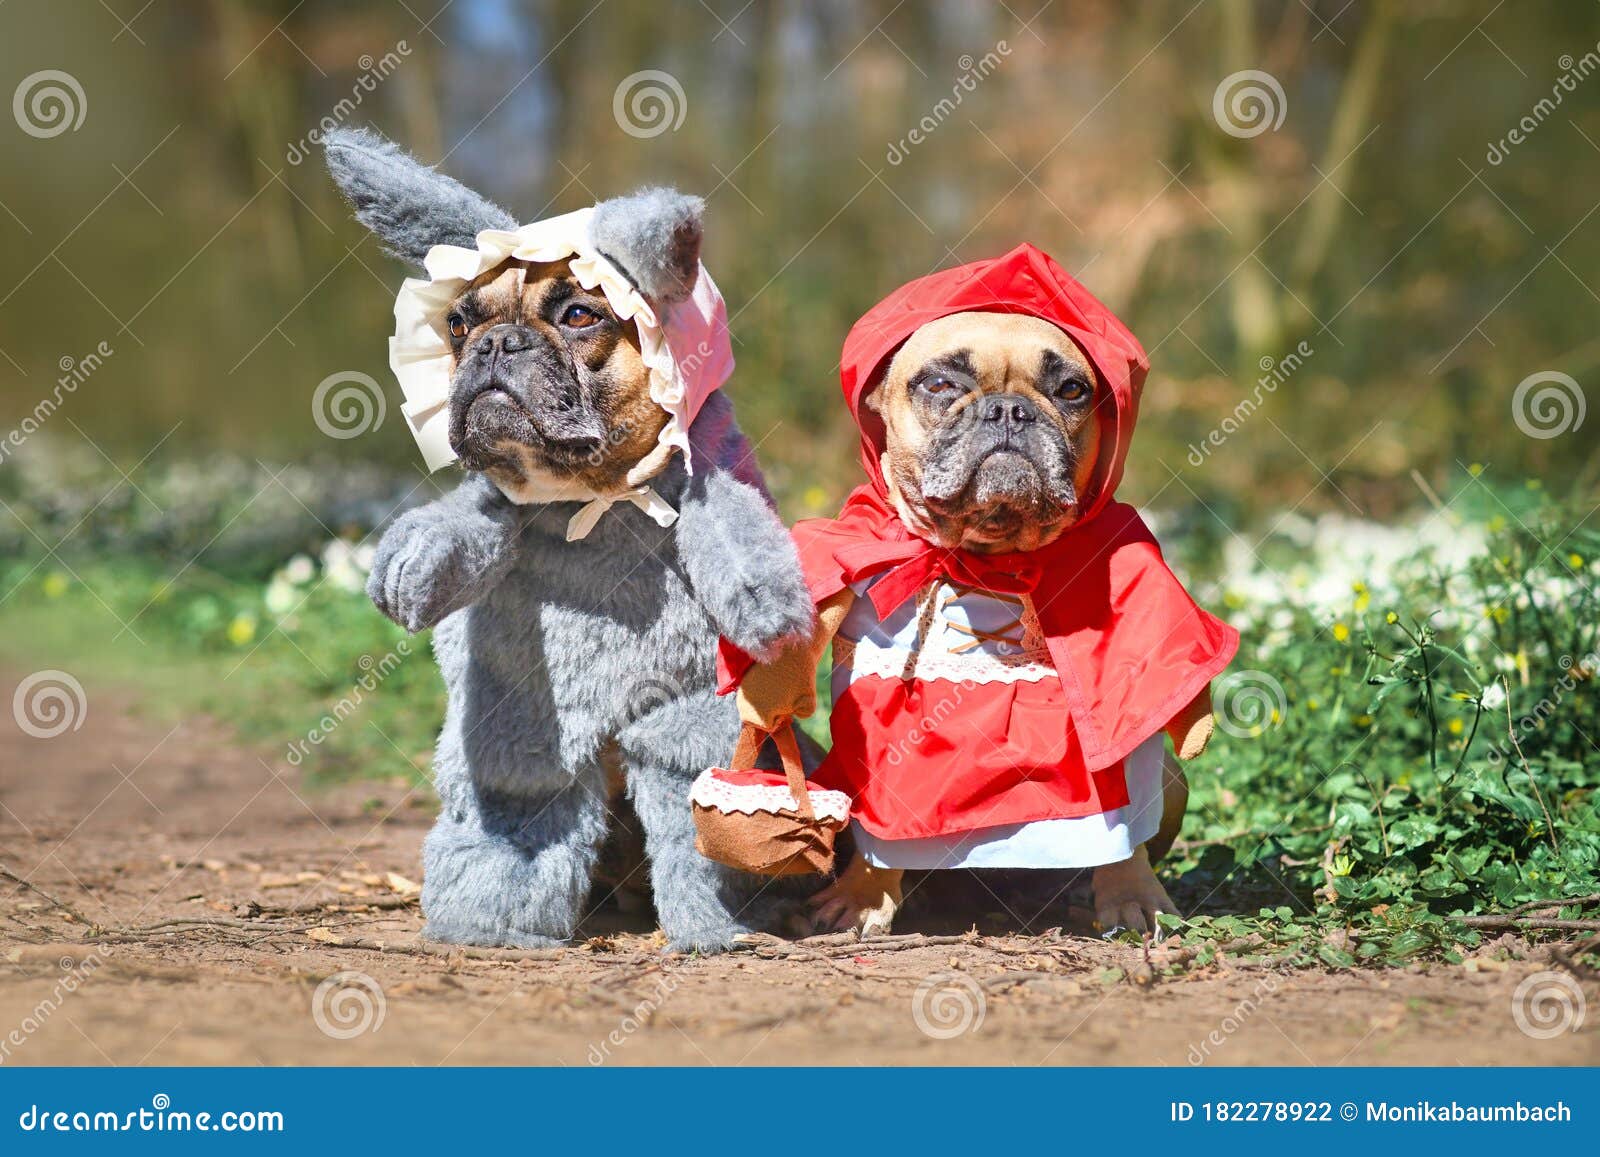 cute pair of french bulldog dogs dressed up as fairytale characters little red riding hood and big bad wolf with costumes